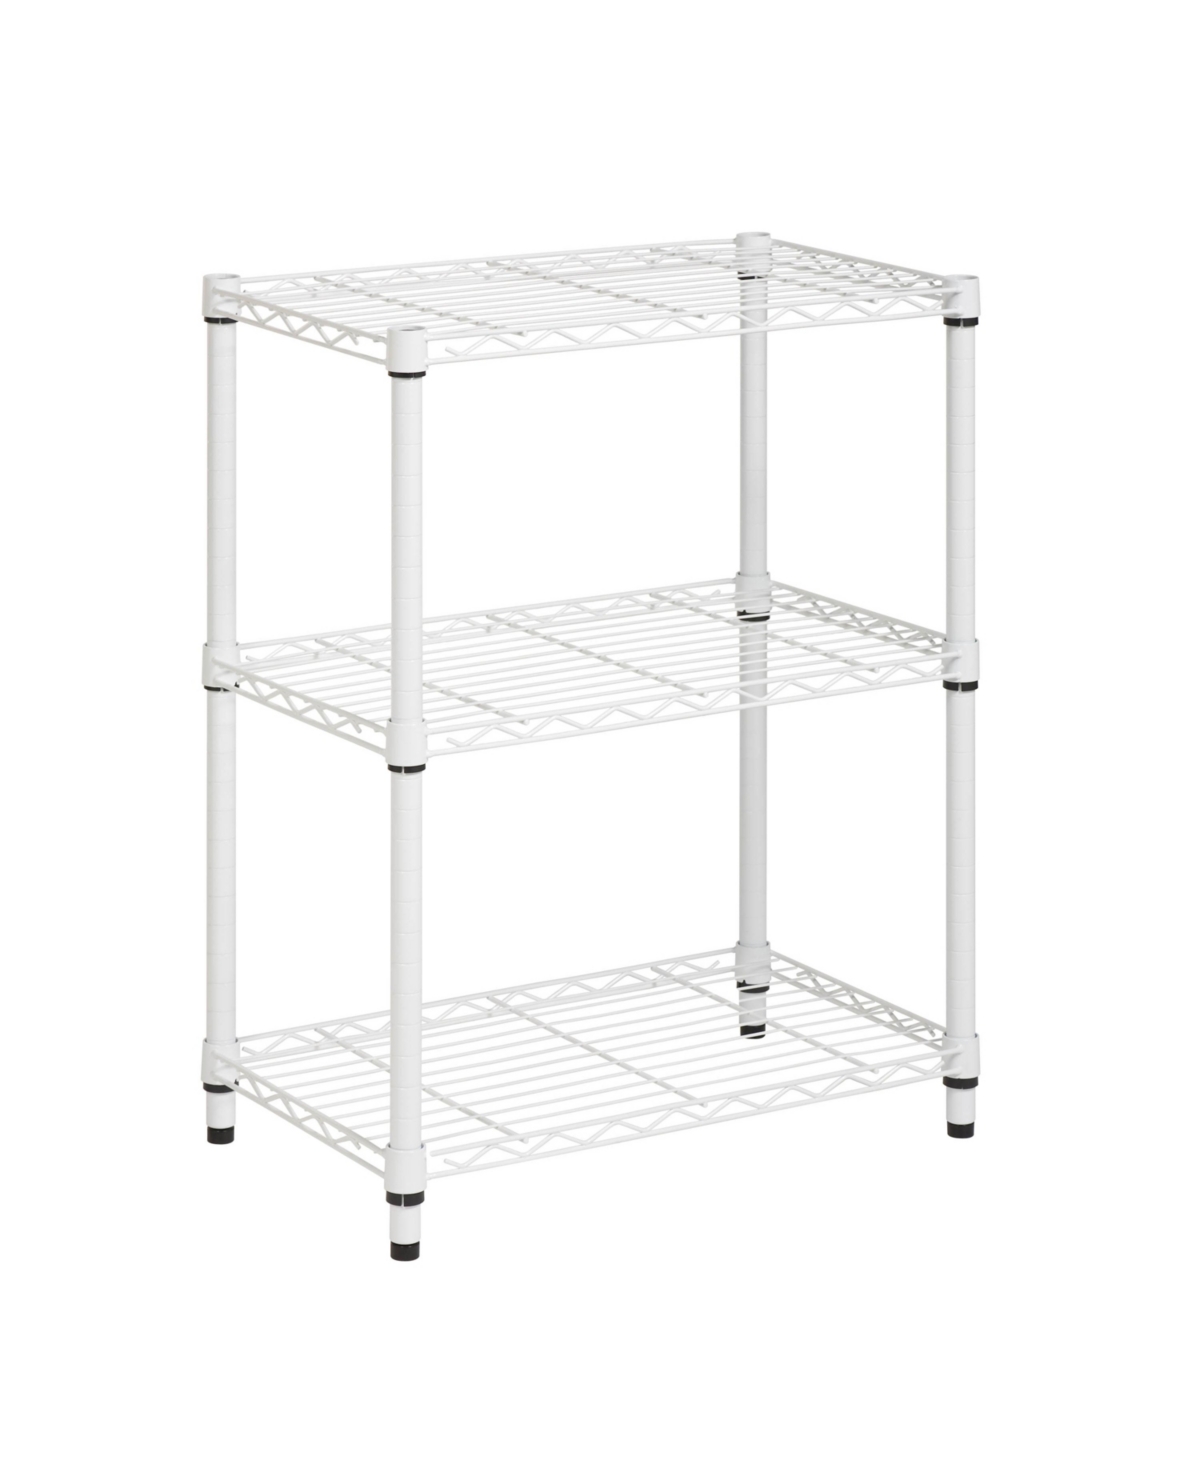 Honey Can Do Heavy Duty 3 Tier Adjustable Shelving Unit In White